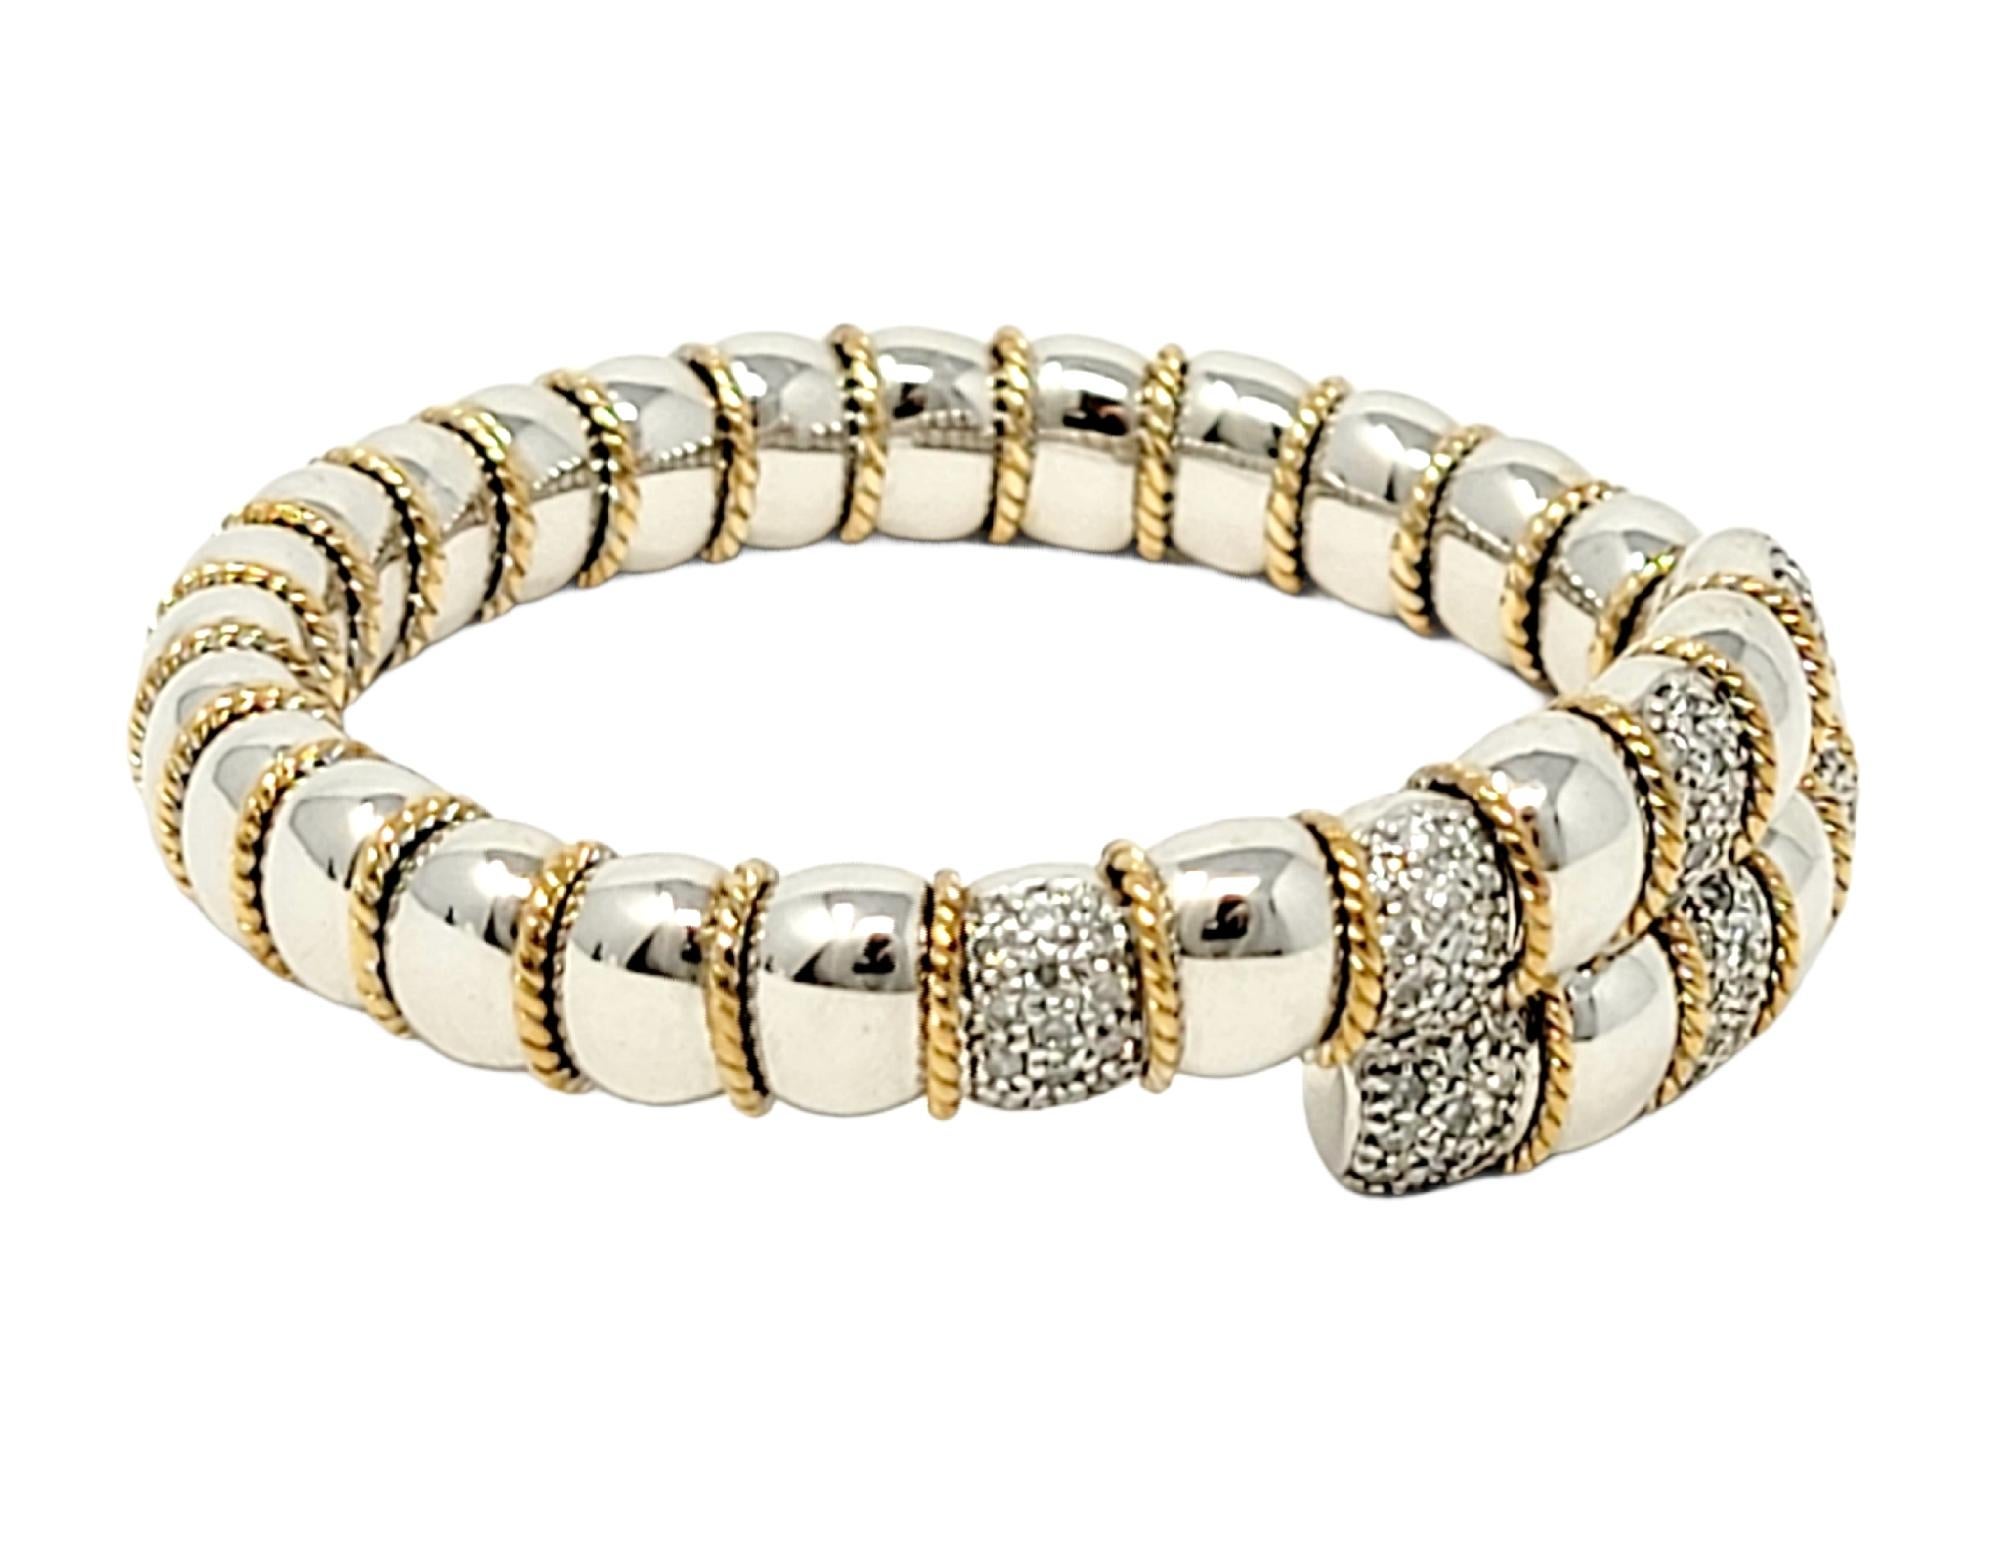 Beautiful diamond station bracelet by jewelry designer, Sonia B. Dressed up or down, this lovely and versatile piece is the perfect addition to your jewelry wardrobe. It features a single row of high polished 14 karat white gold sections, each